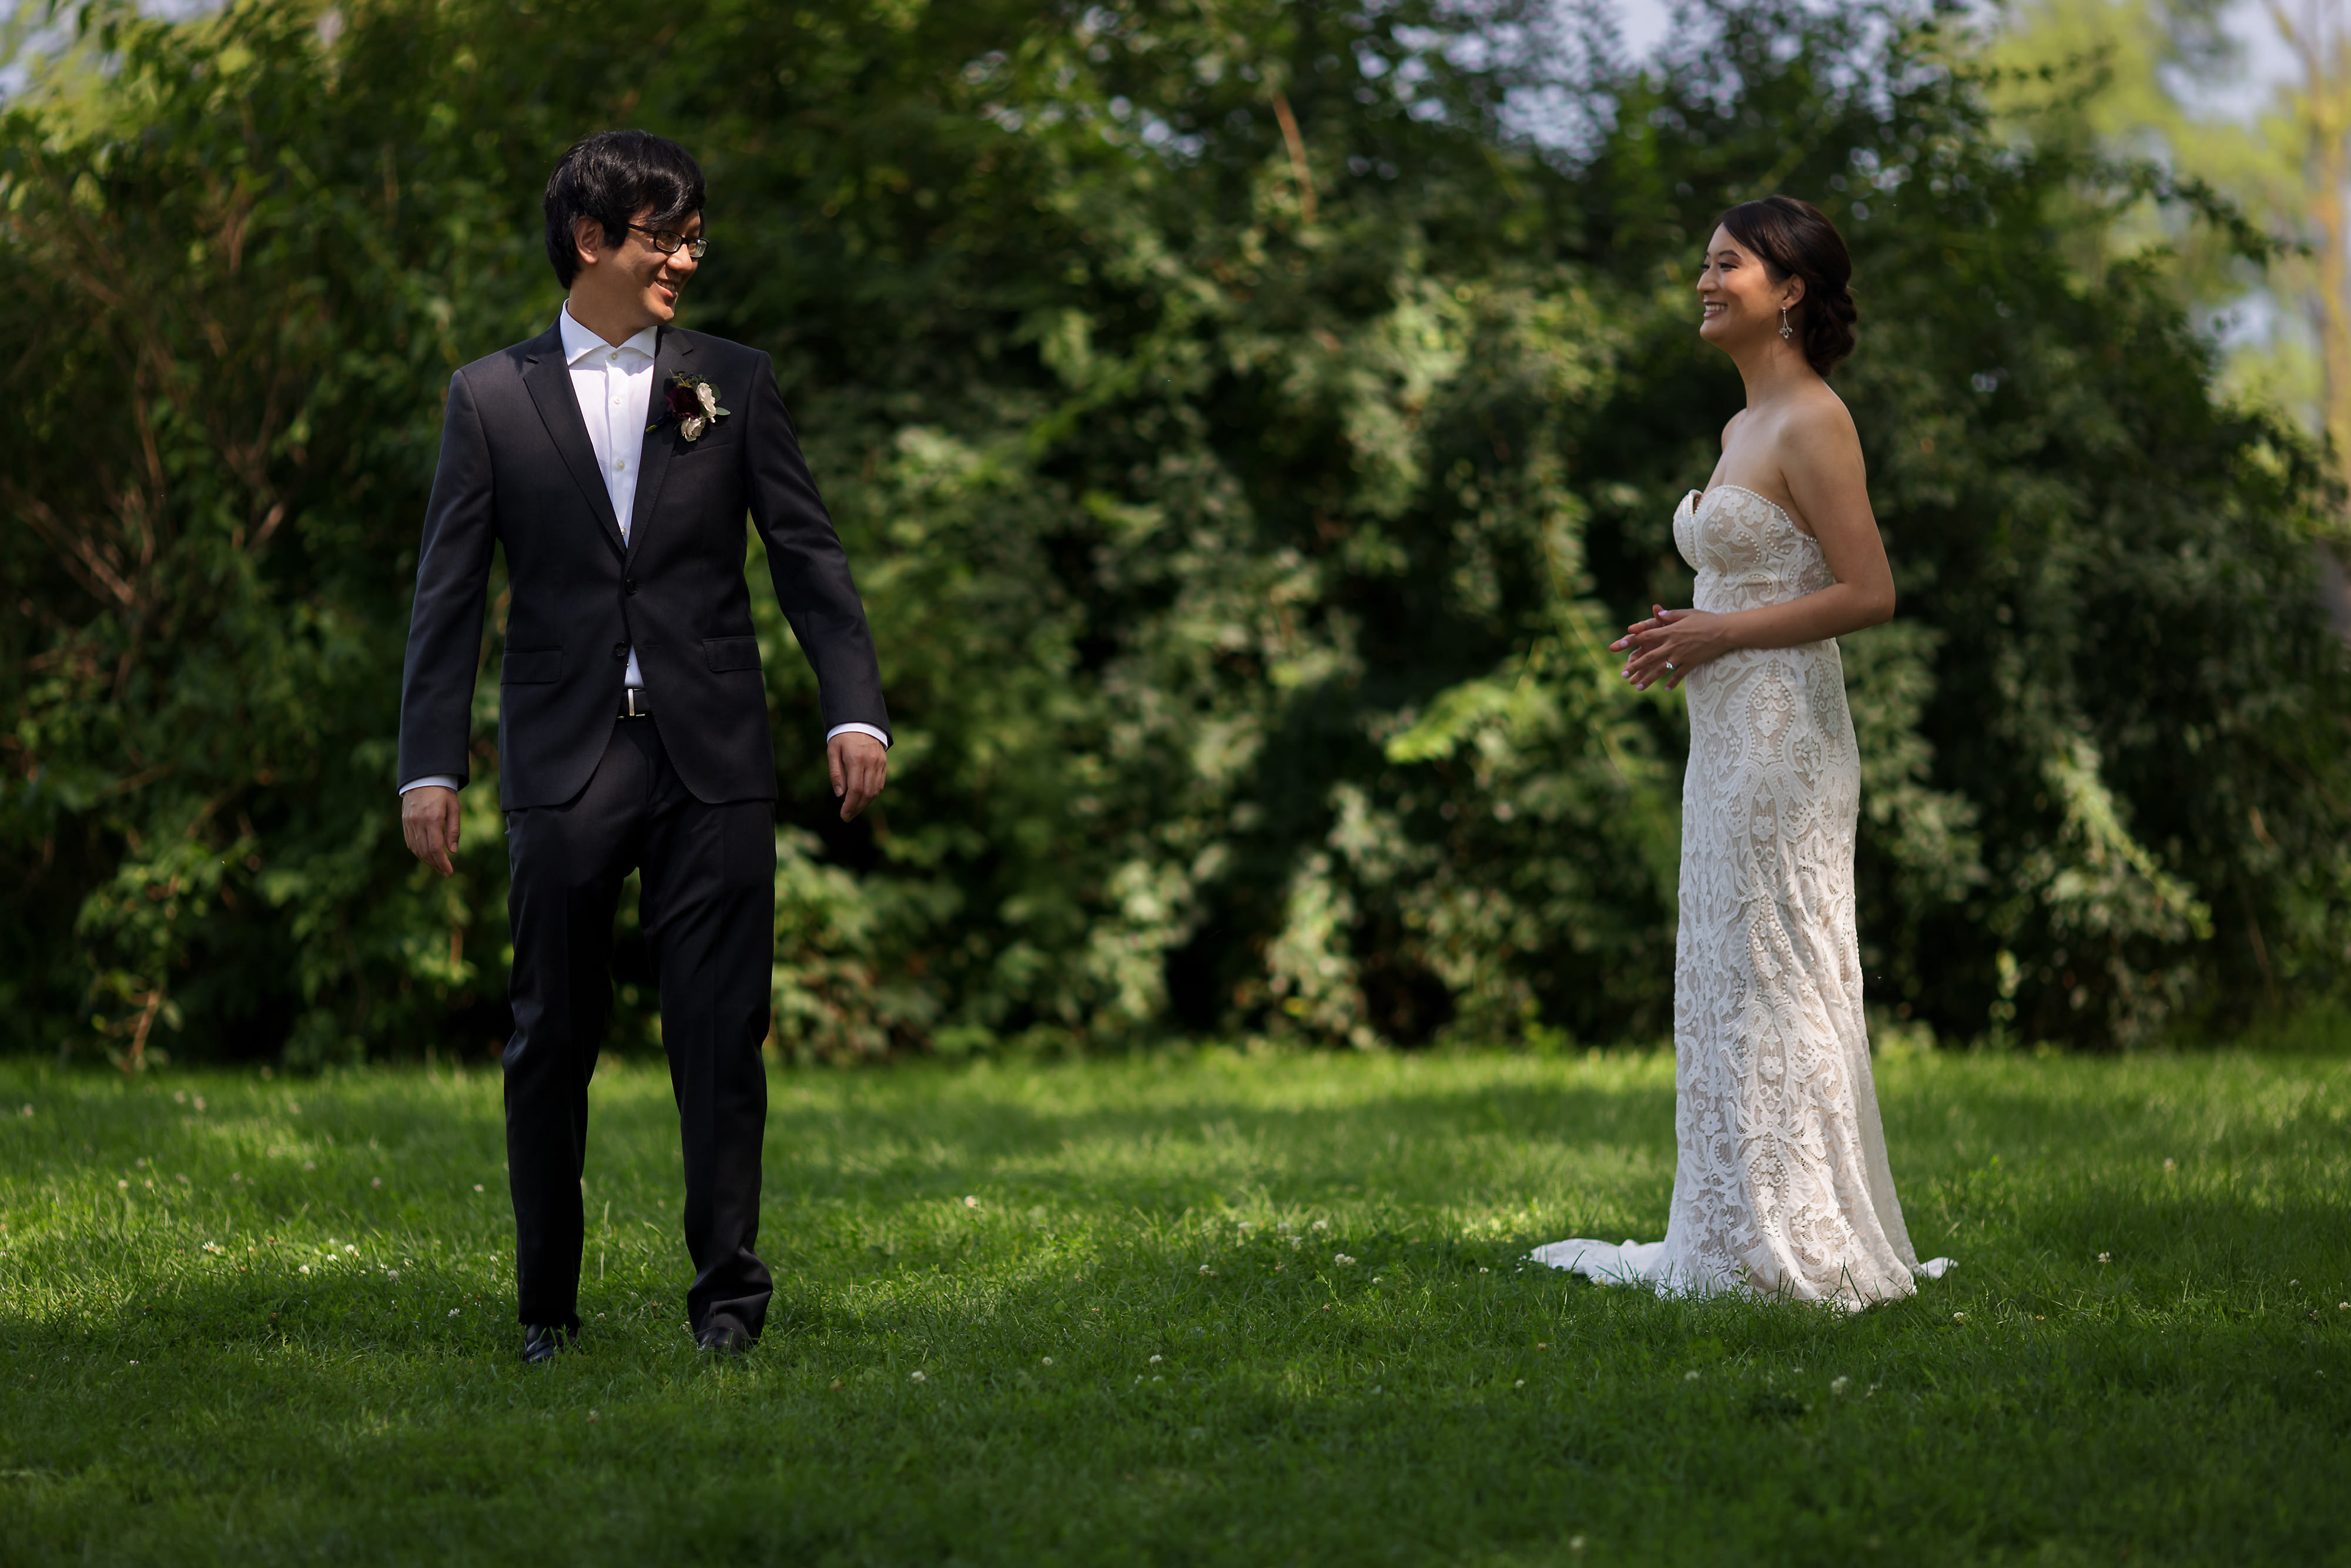 First look between bride and groom at Olive Park in Chicago